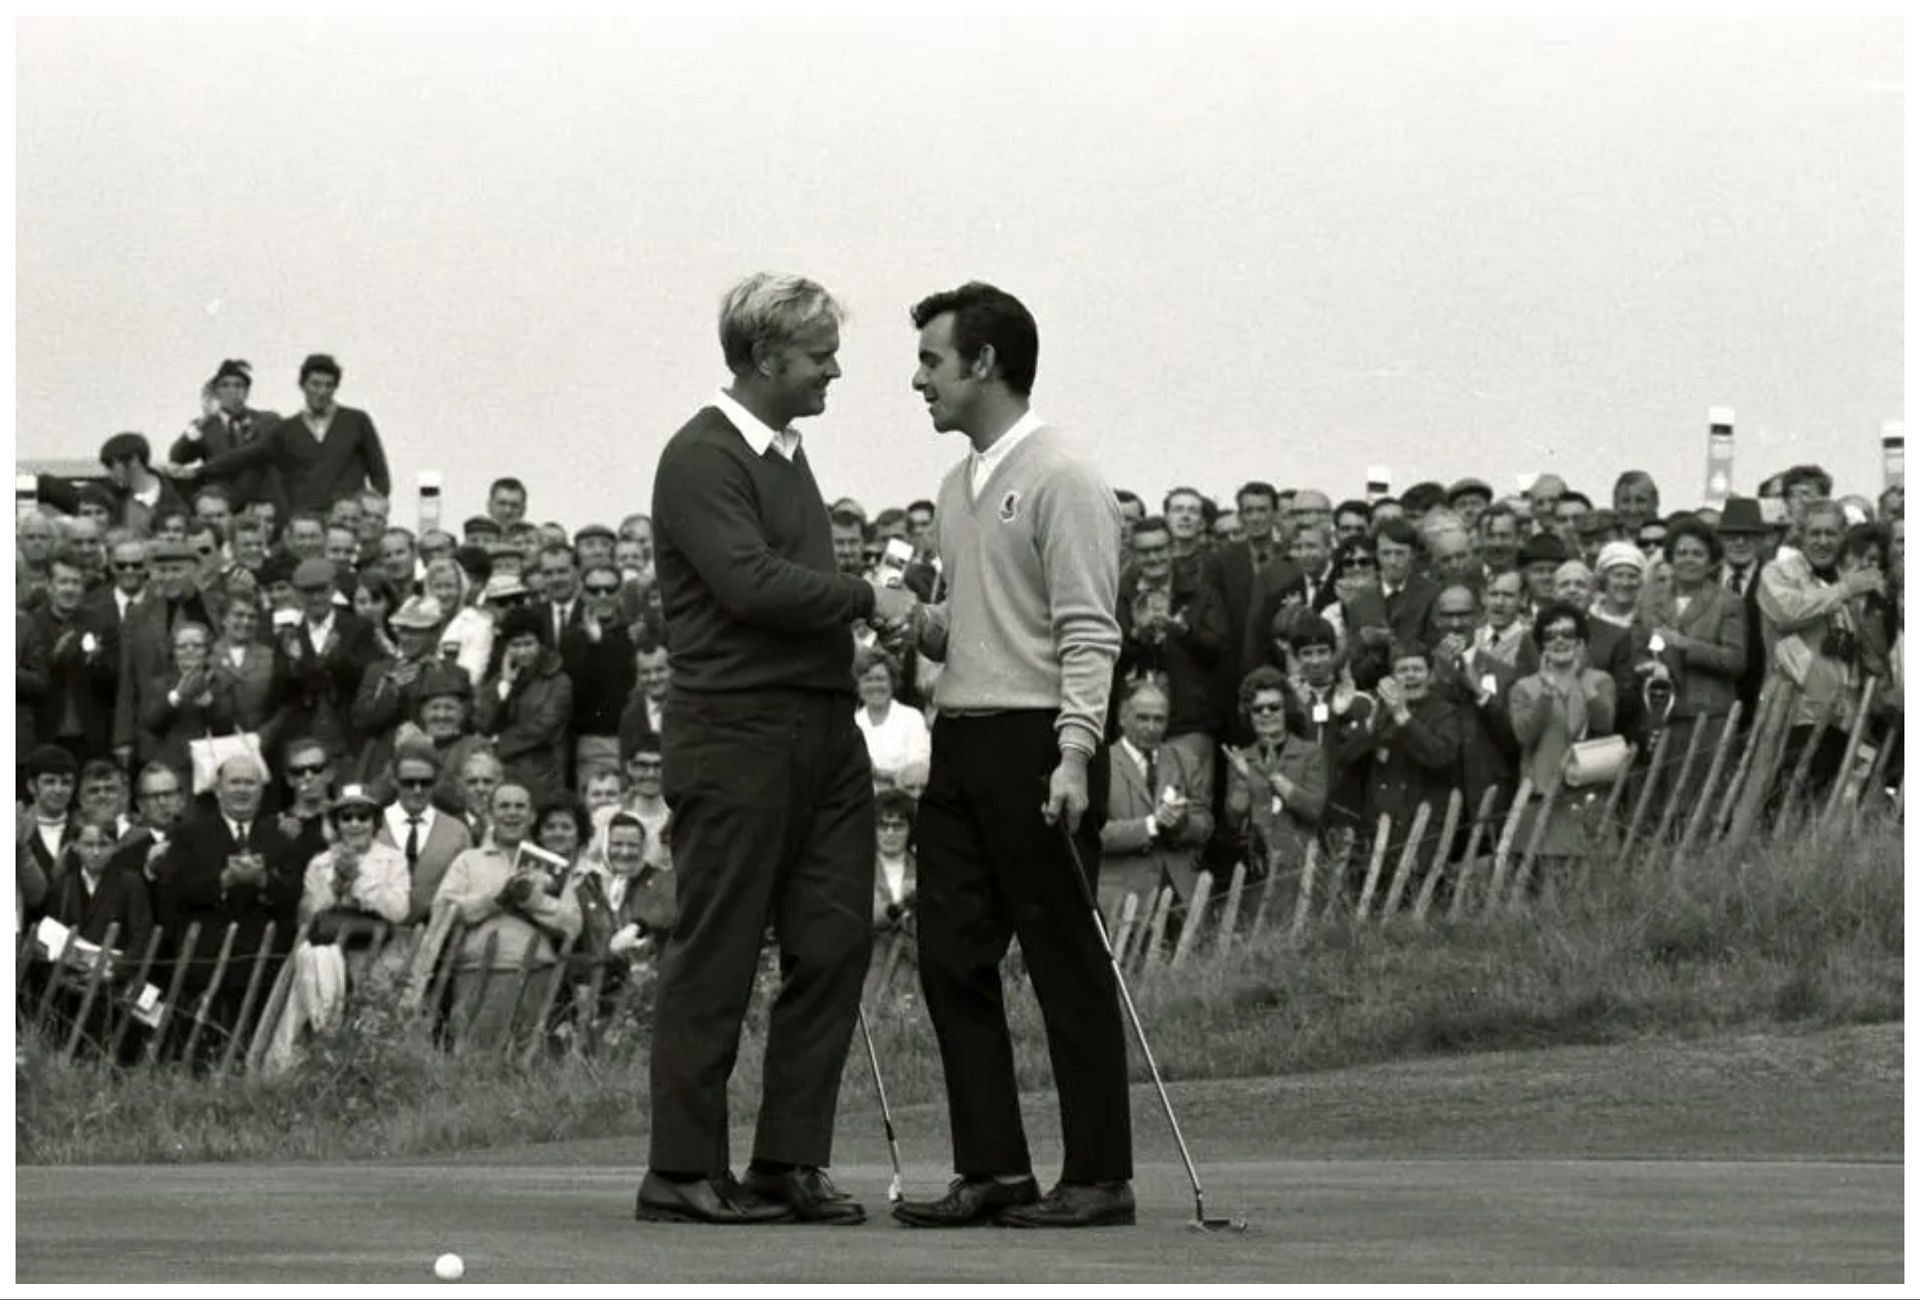 Jack Nicklaus and Tony Jacklin at the Ryder Cup 